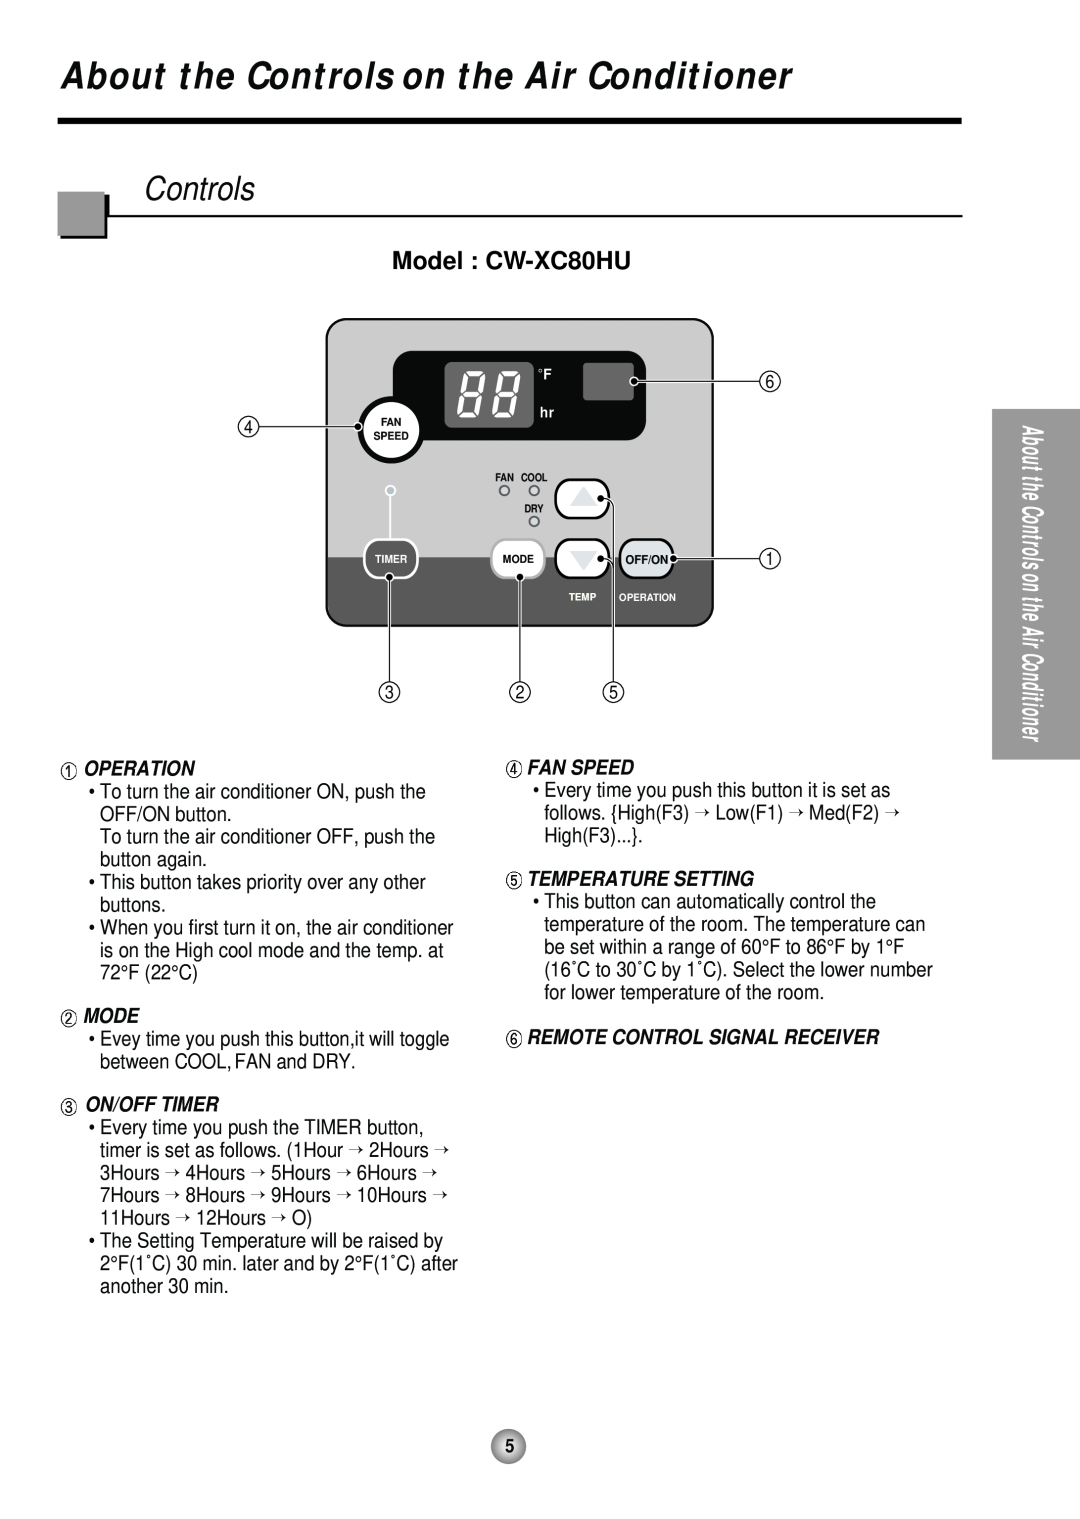 Panasonic manual About the Controls on the Air Conditioner, Model CW-XC80HU, Operation, On/Off Timer, Fan Speed 